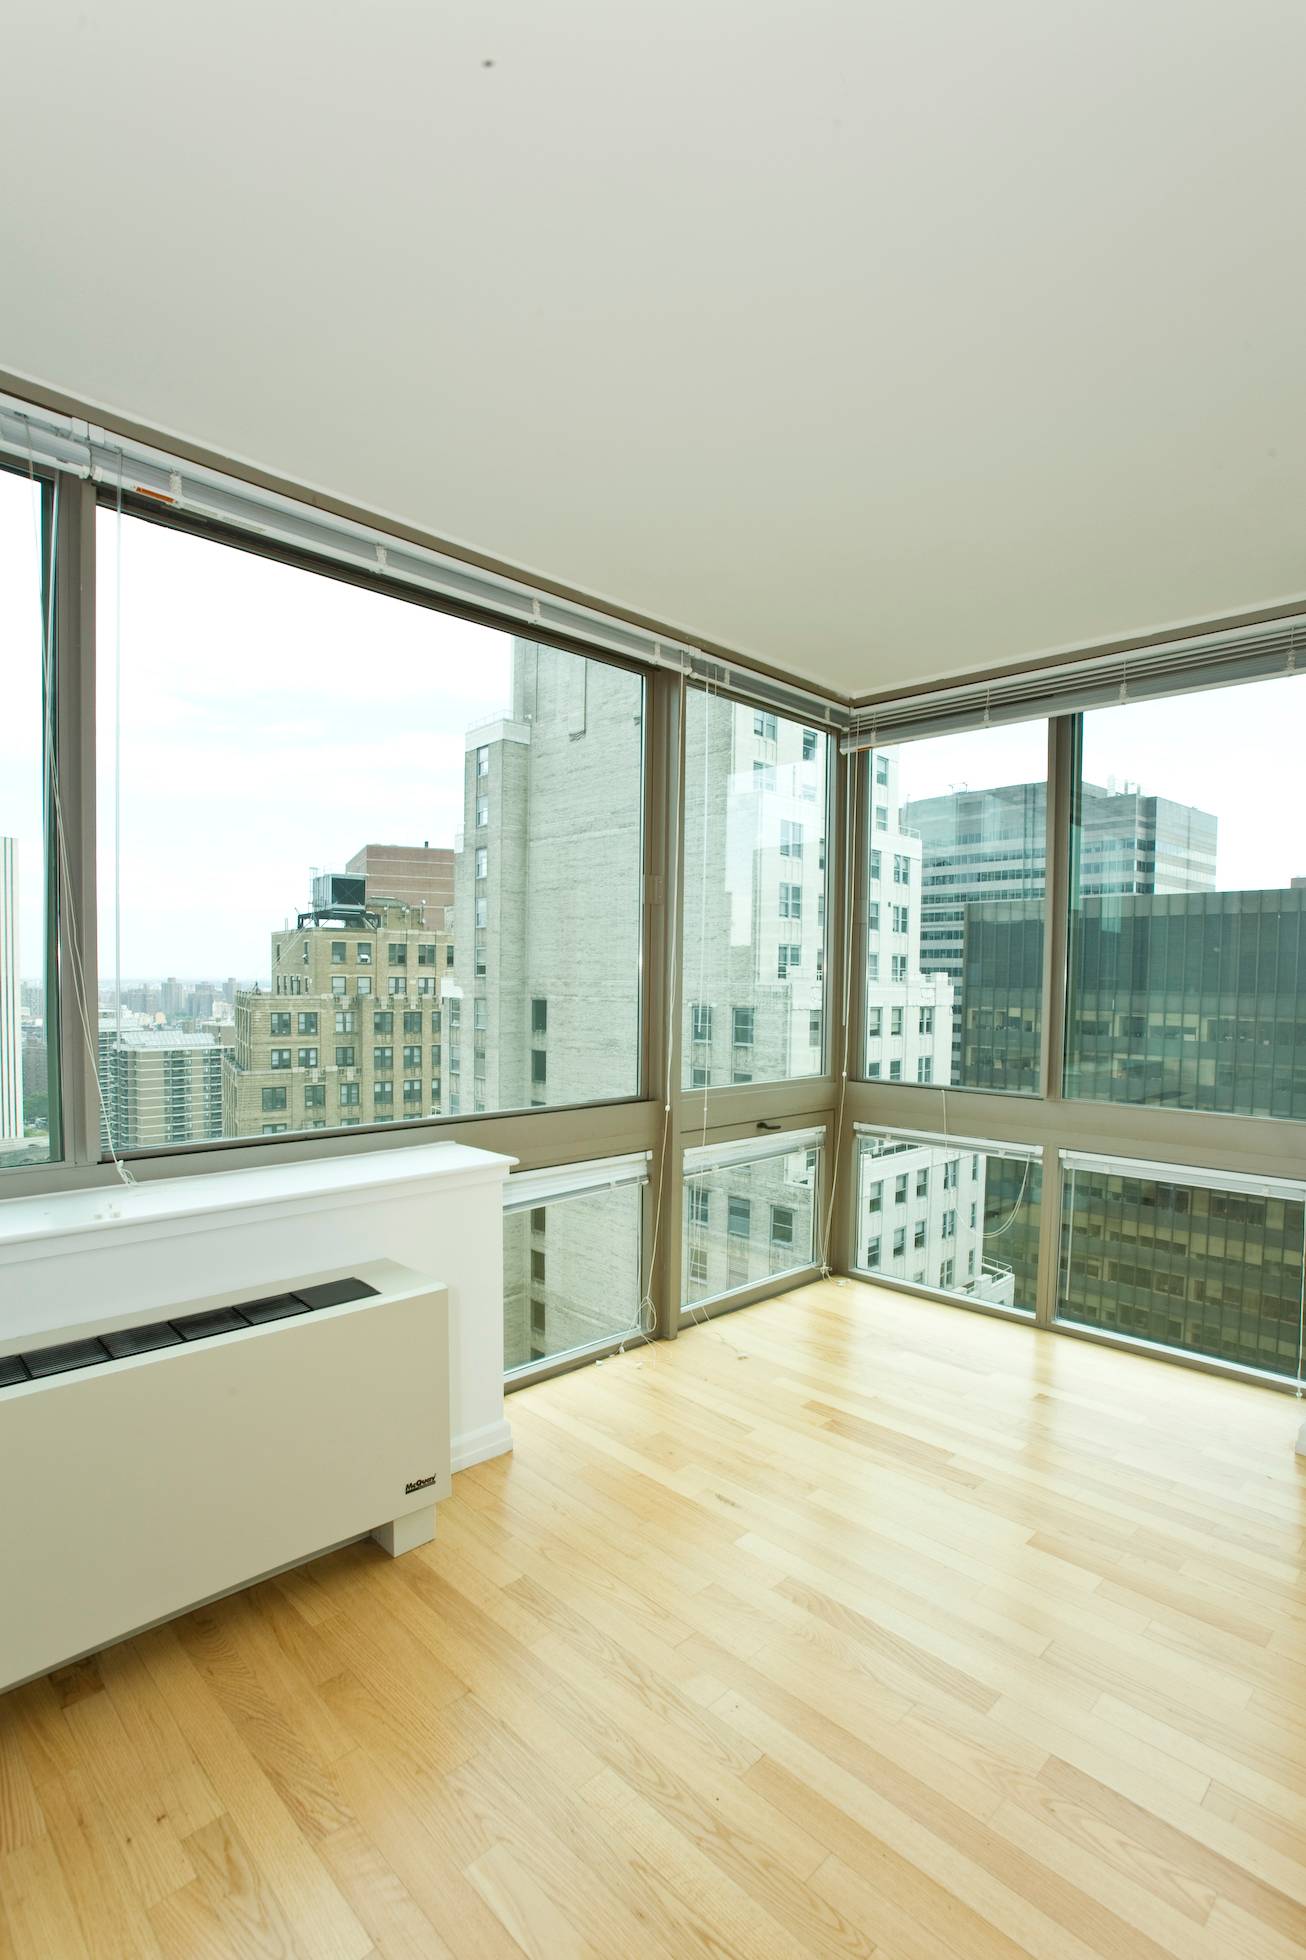 Penthouse Living In FiDi For The Right Price!